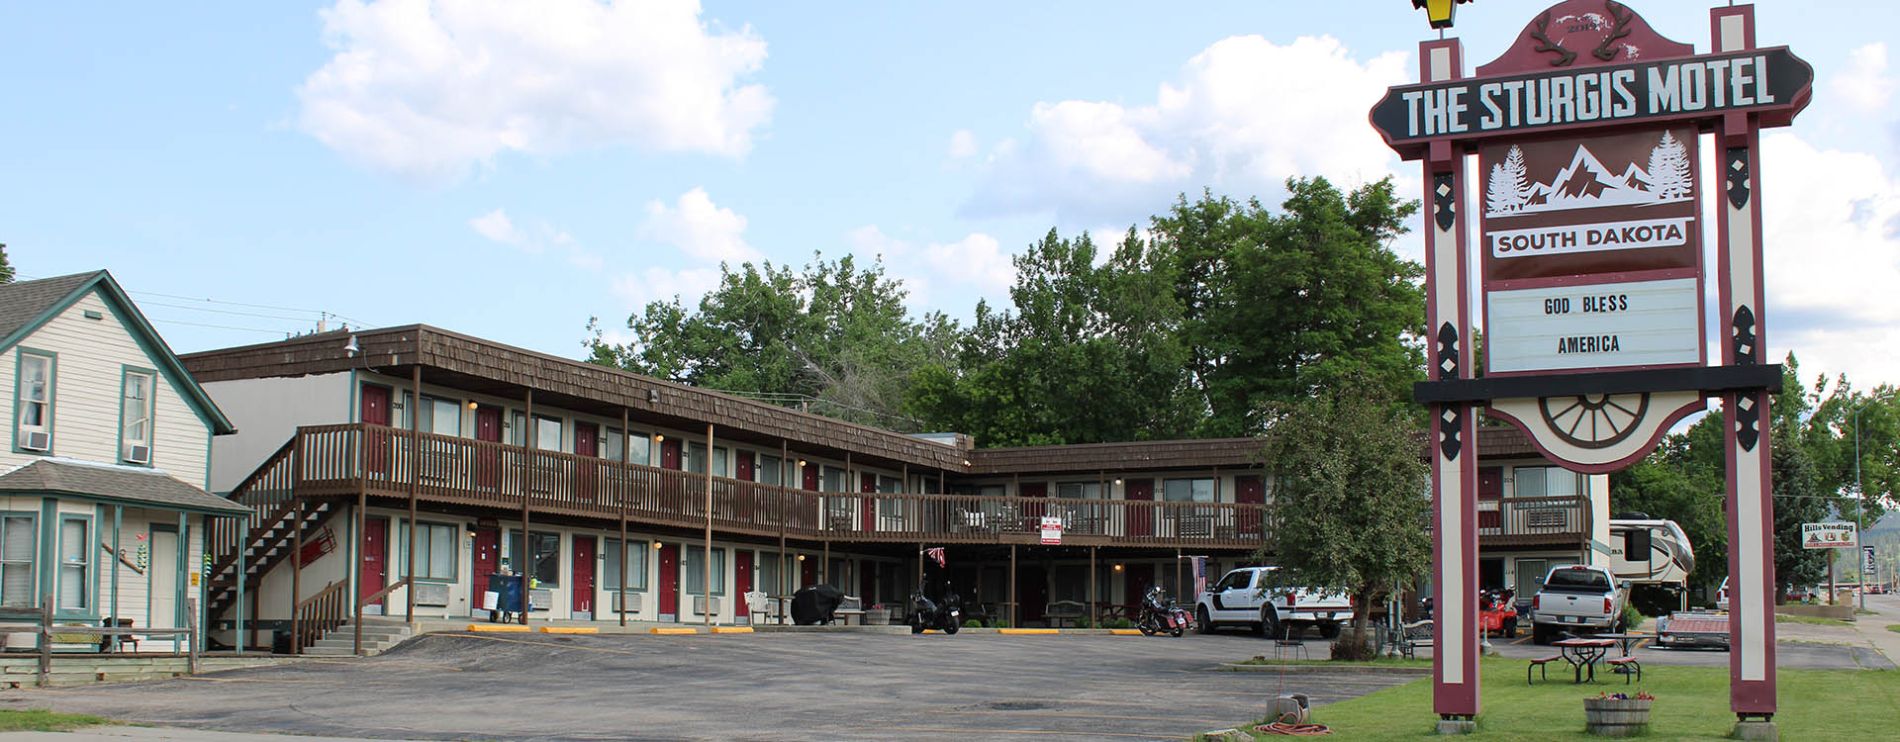 Photo of the exterior of The Sturgis Motel.